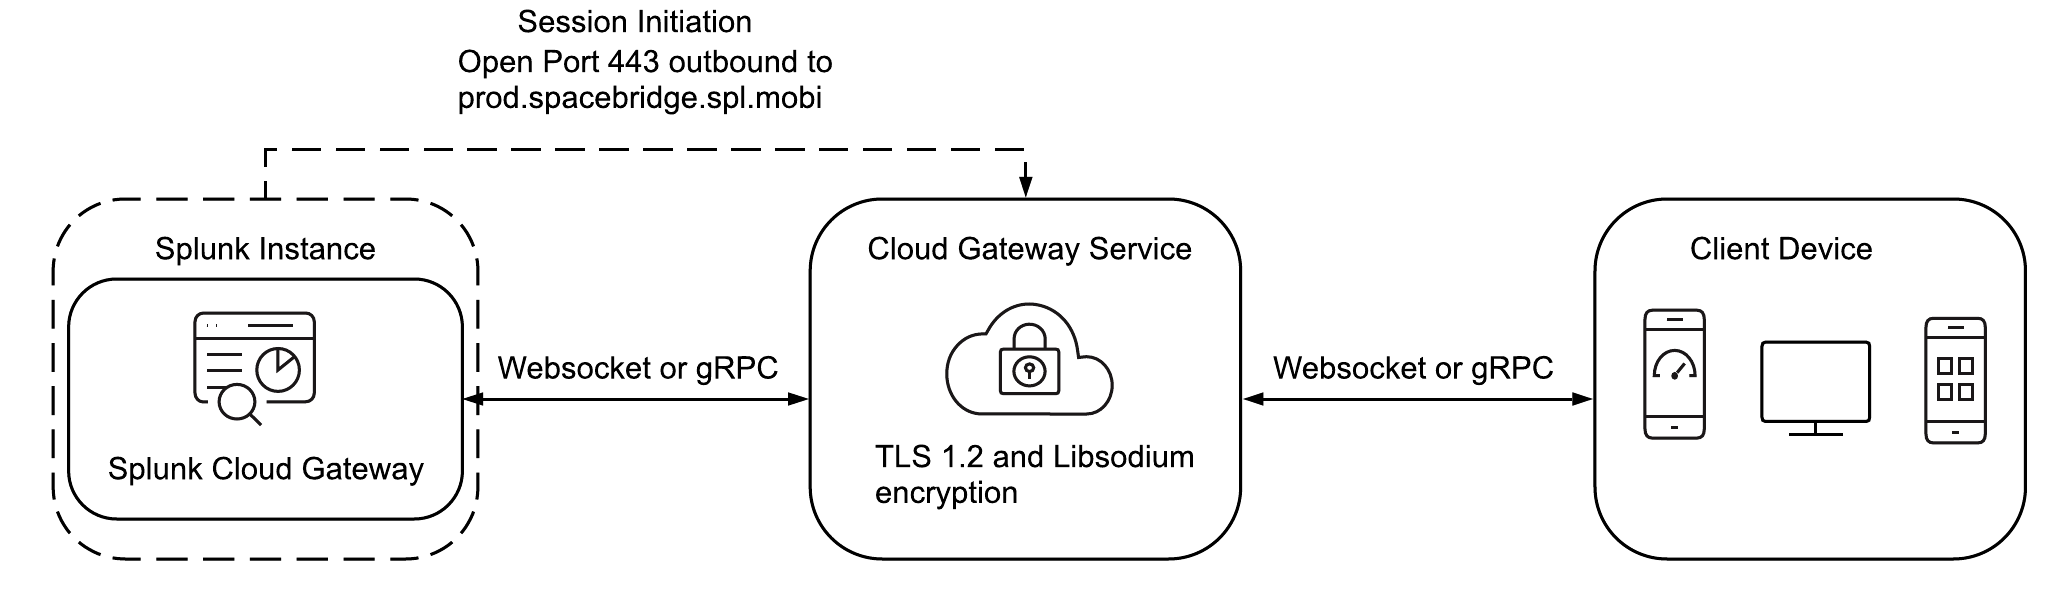 This diagram illustrates how mobile devices can communicate with the Splunk Cloud Gateway app. Open port 443 outbound to prod.spacebridge.spl.mobi to allow message exchanges between mobile devices and the on-premises Splunk Cloud Gateway app through Spacebridge.